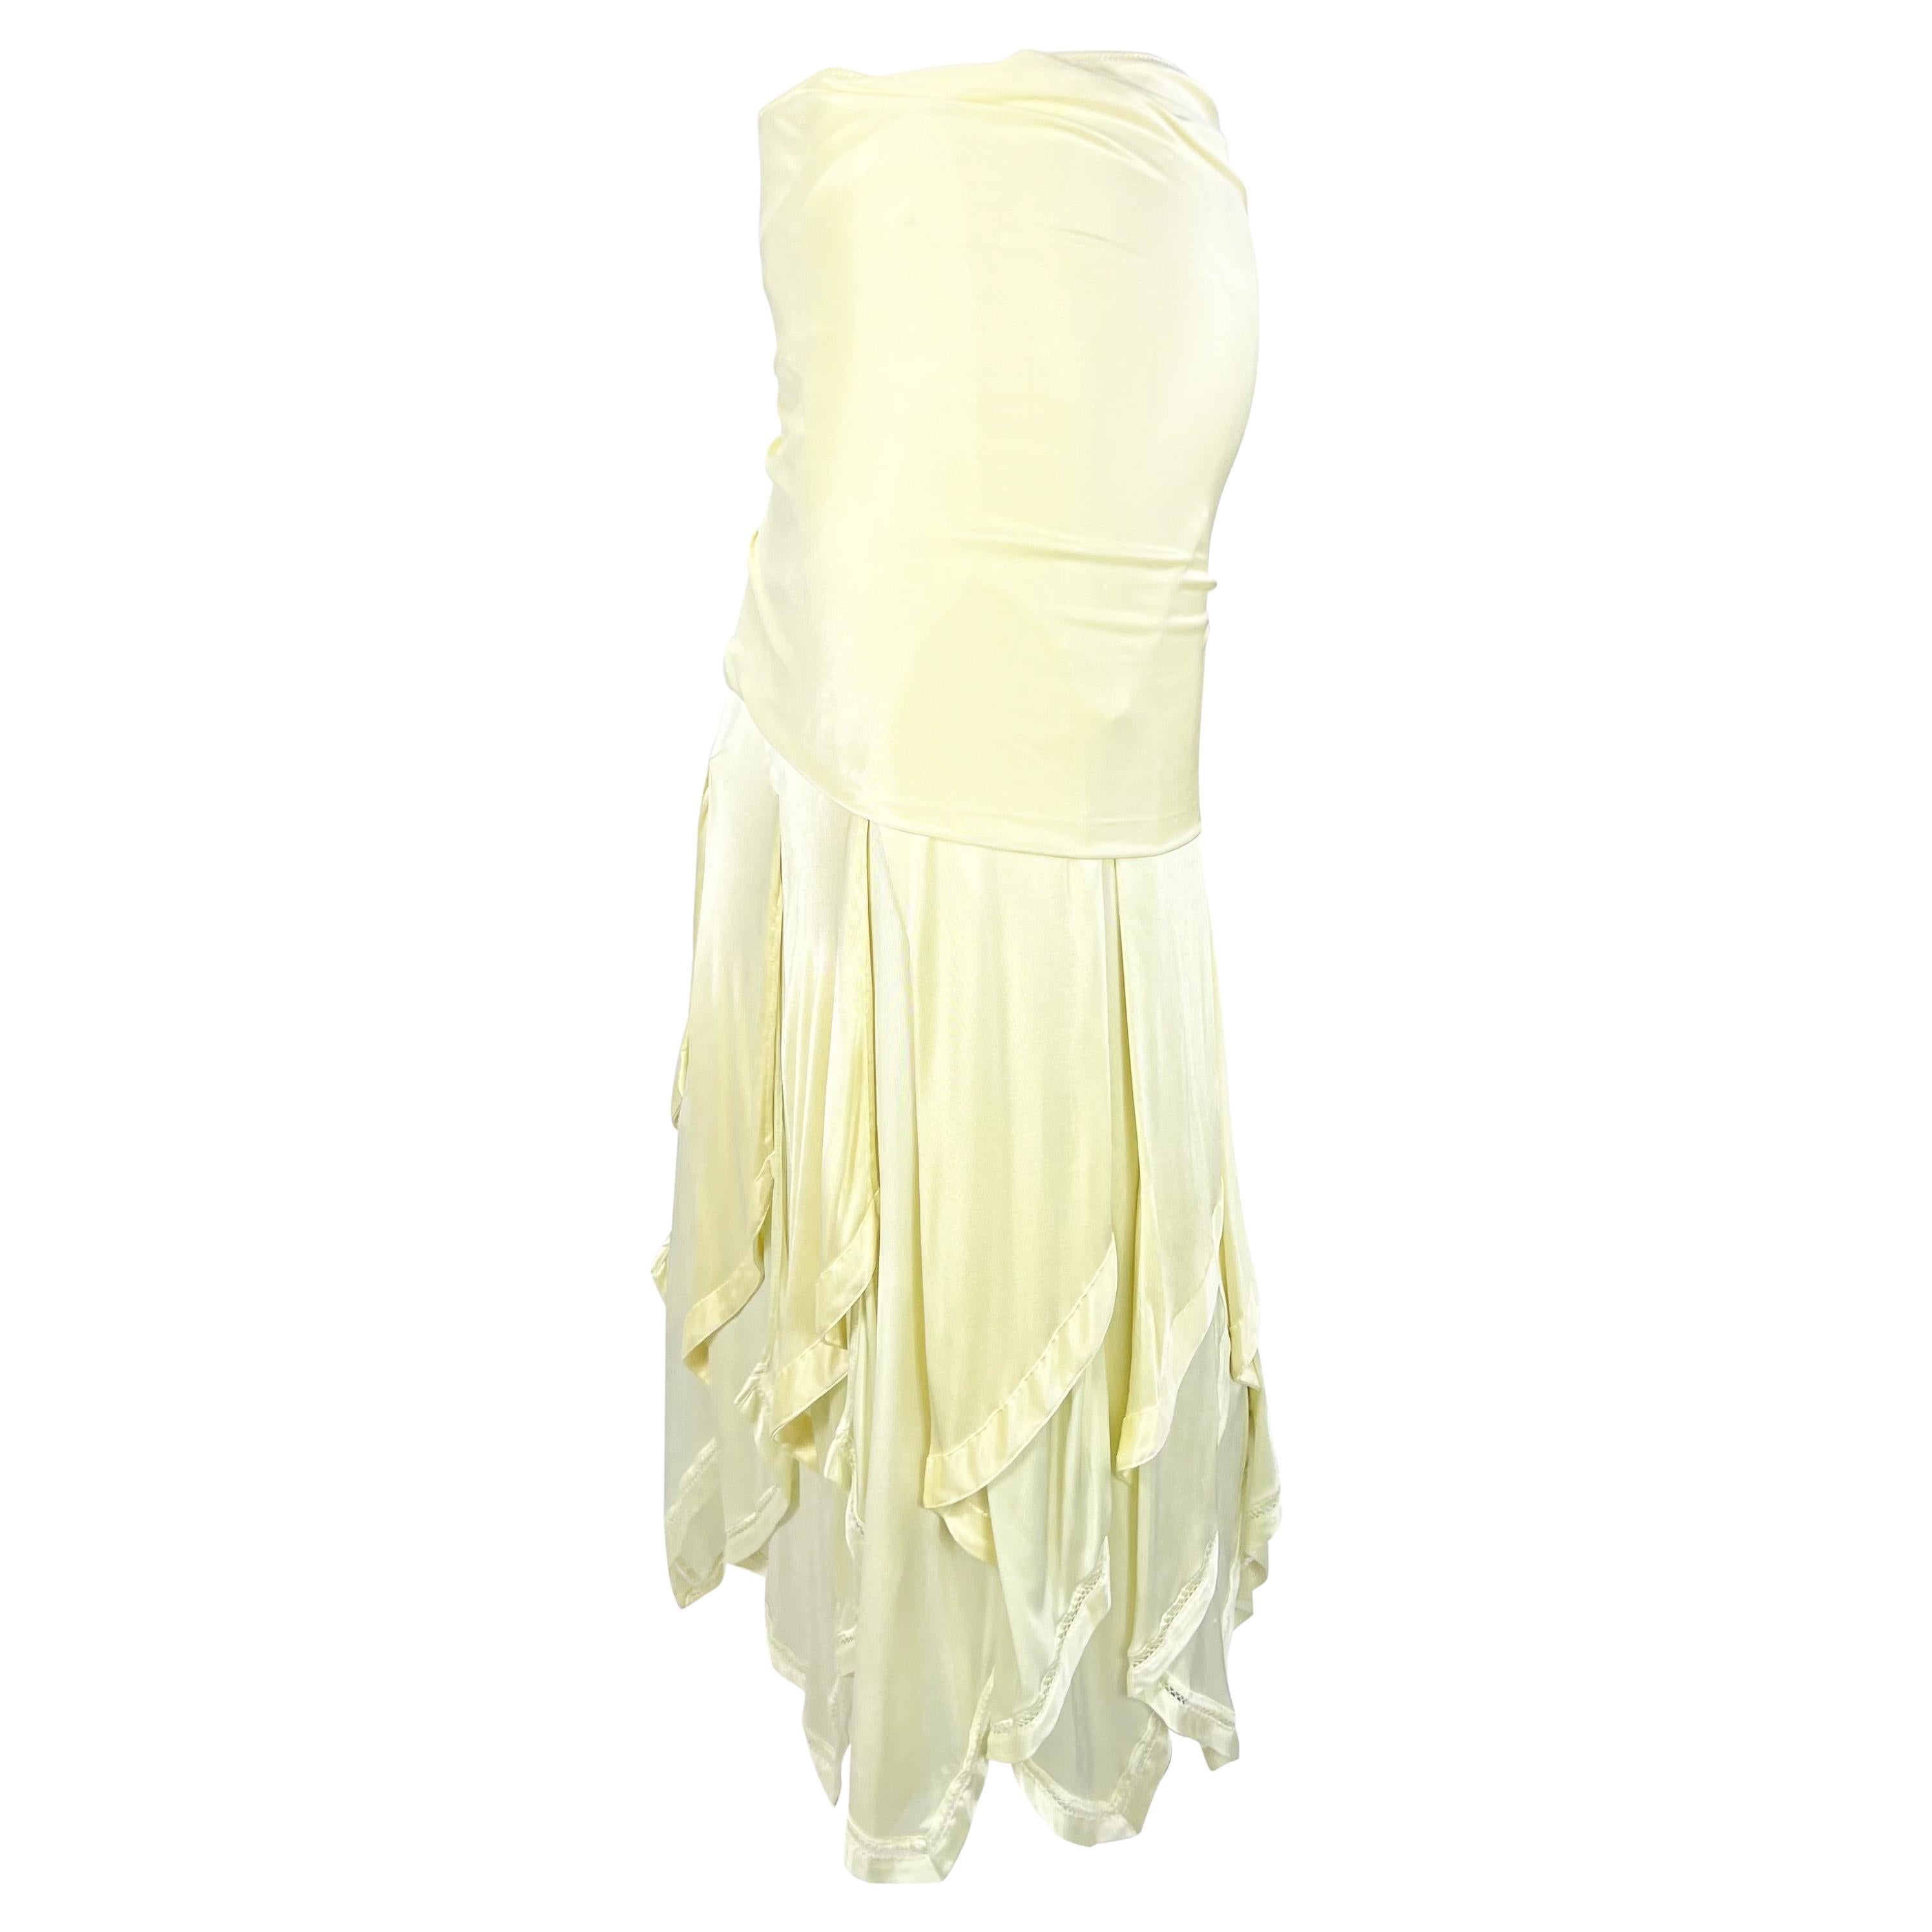 Women's S/S 2004 Yves Saint Laurent by Tom Ford Runway Off-White Stretch Ruffle Skirt For Sale